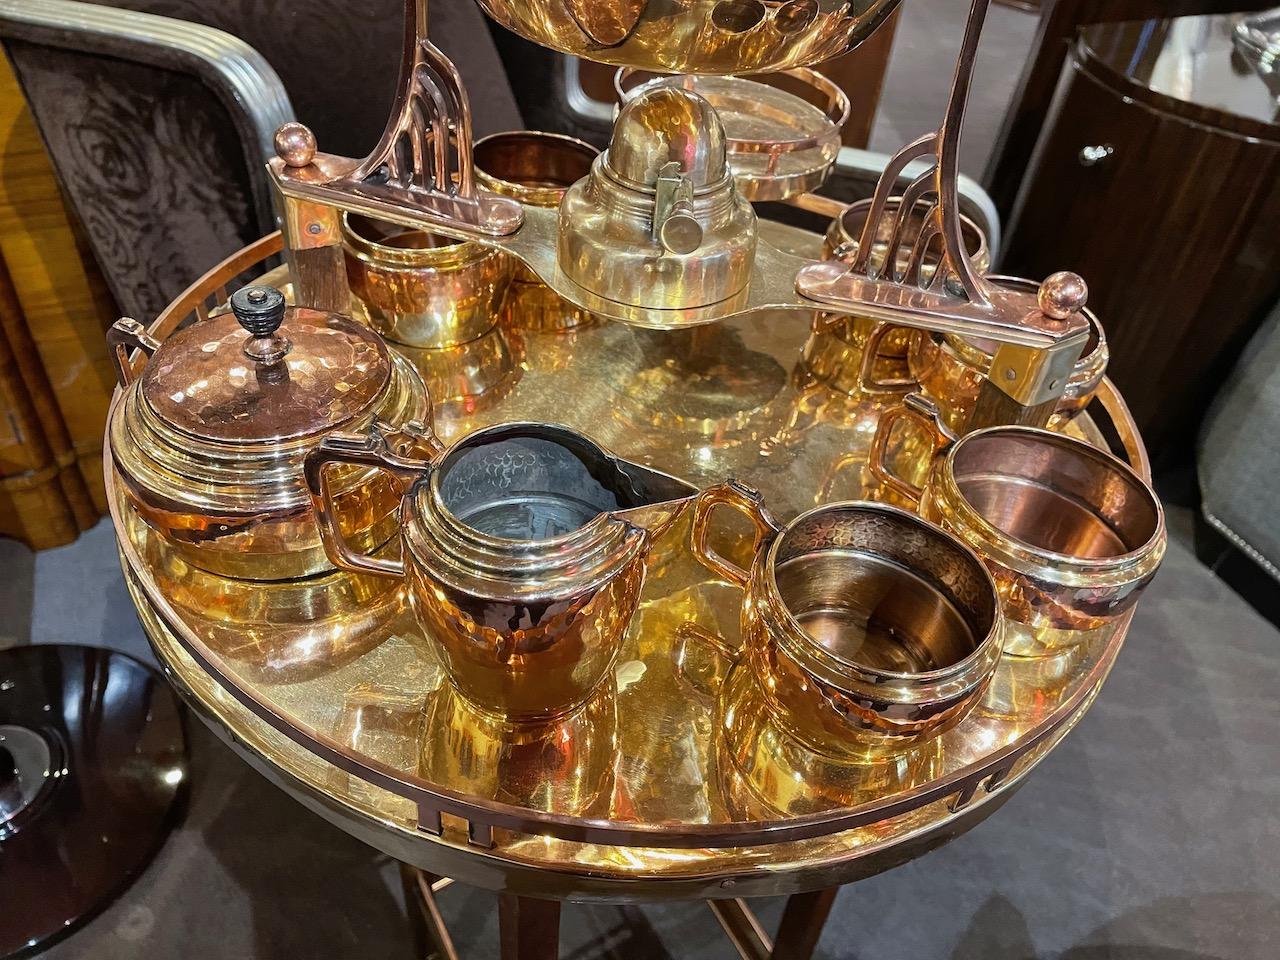 German Art Nouveau Tea/Coffee Service in Copper and Brass 9 Pieces with Stand